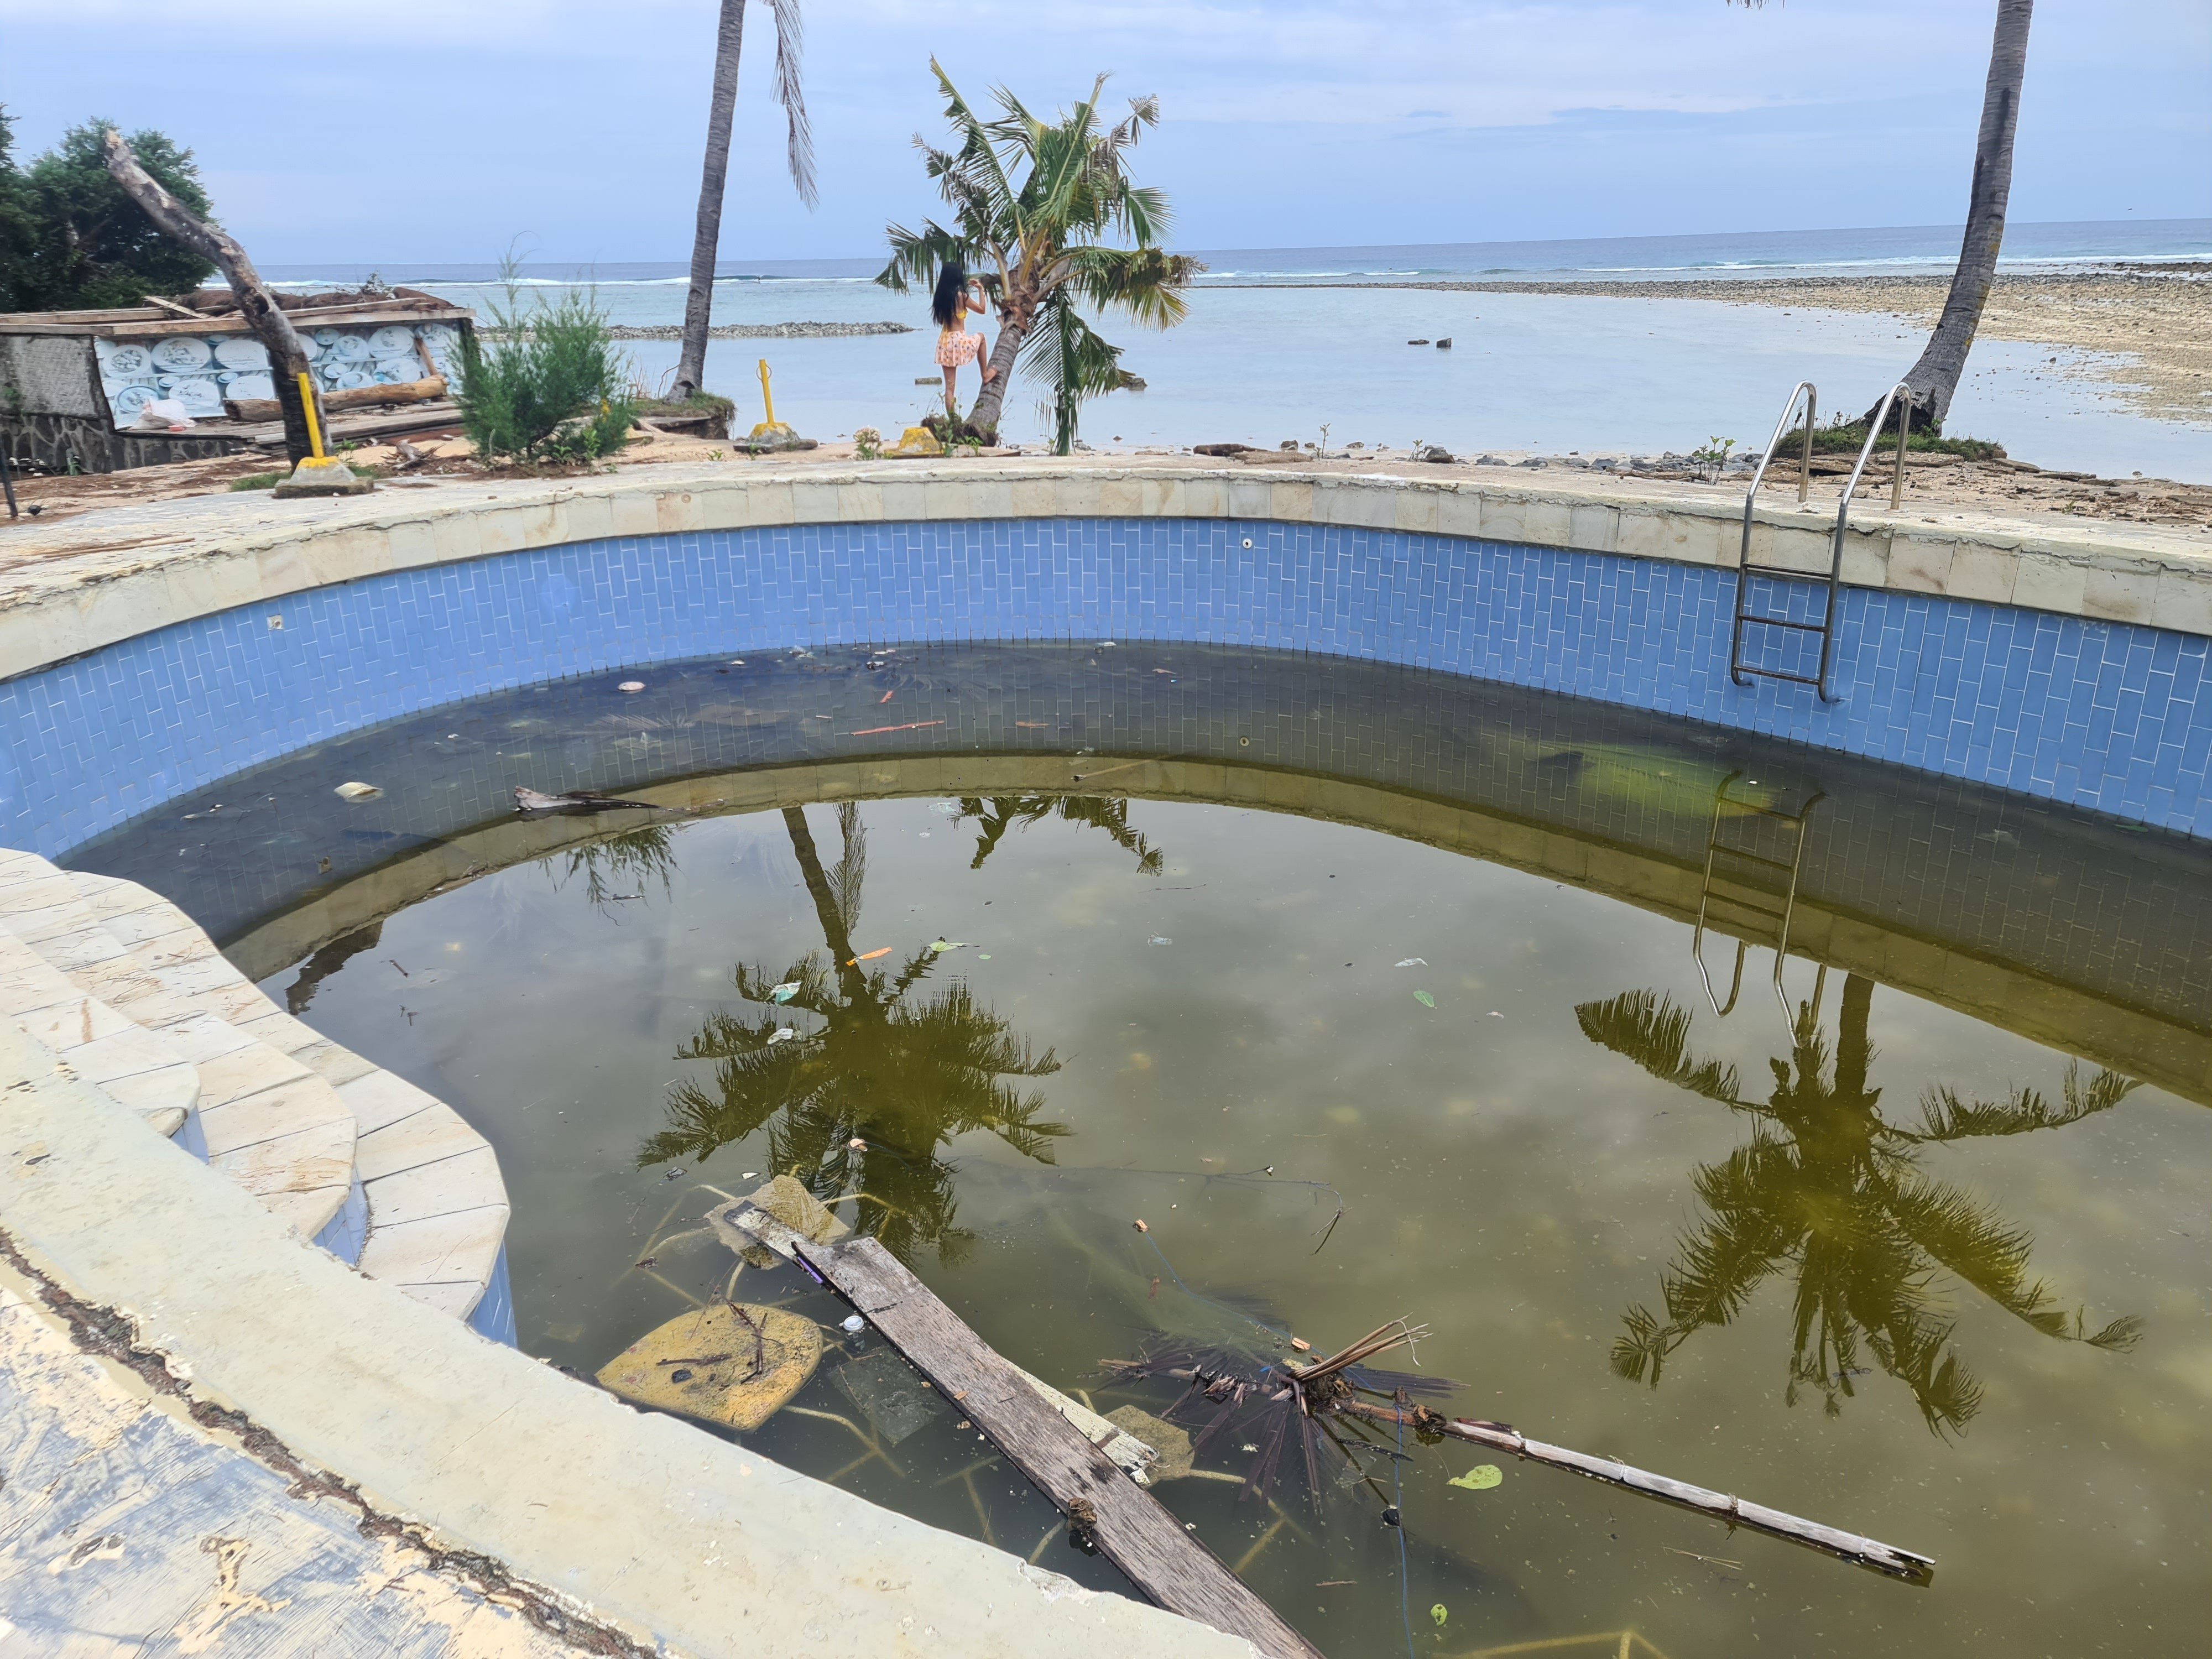 The rubbish-strewn pool of an abandoned resort on the Indonesian island of Gili Air after a tropical cyclone swept through on Christmas Day 2022. Photo: Dave Smith